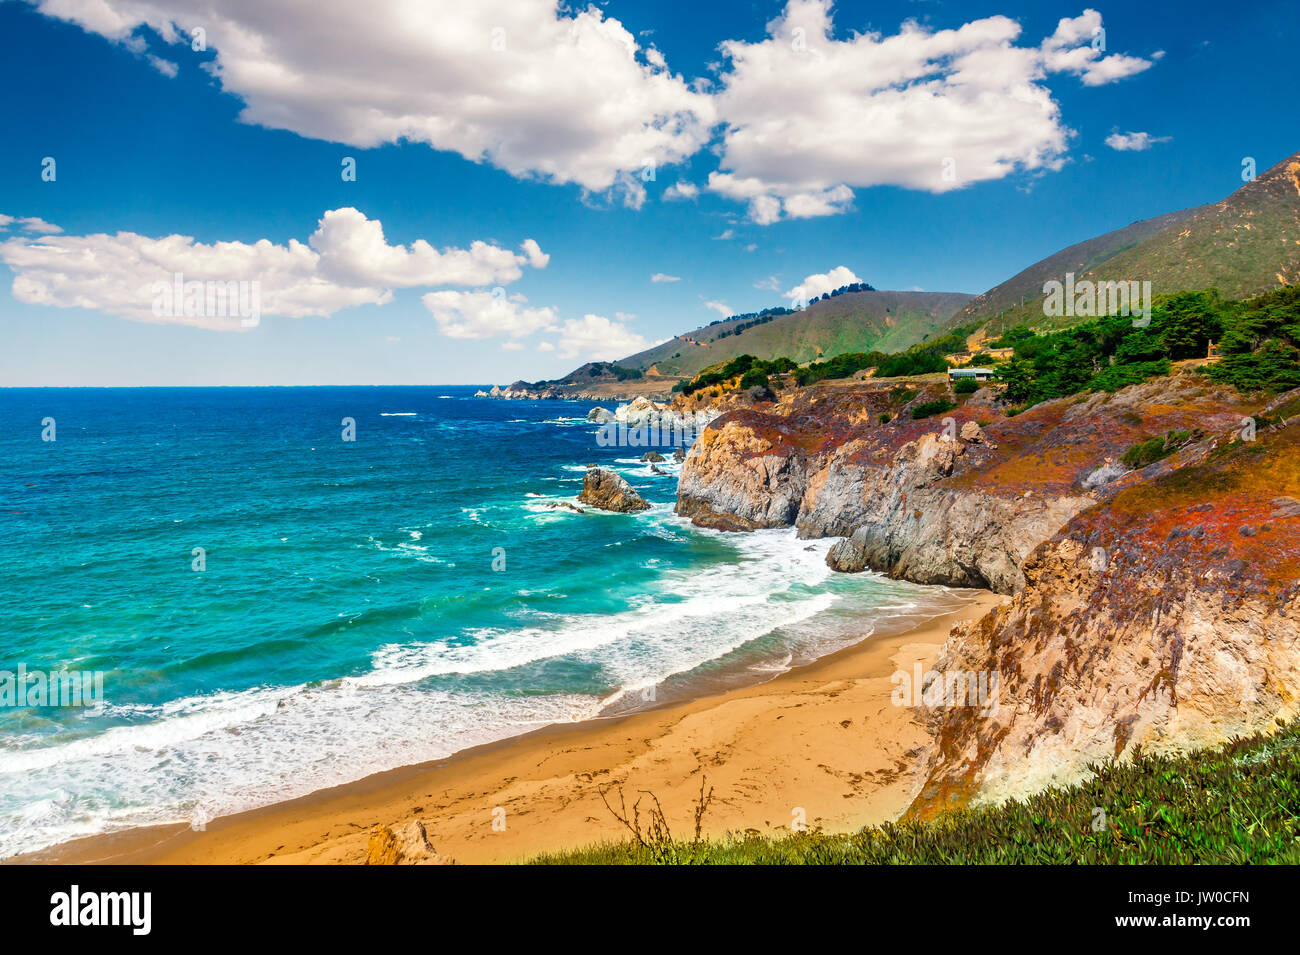 Beautiful coastline scenery on Pacific Coast Highway #1 at the US West Coast traveling south to Los Angeles, Big Sur Area, California. Stock Photo